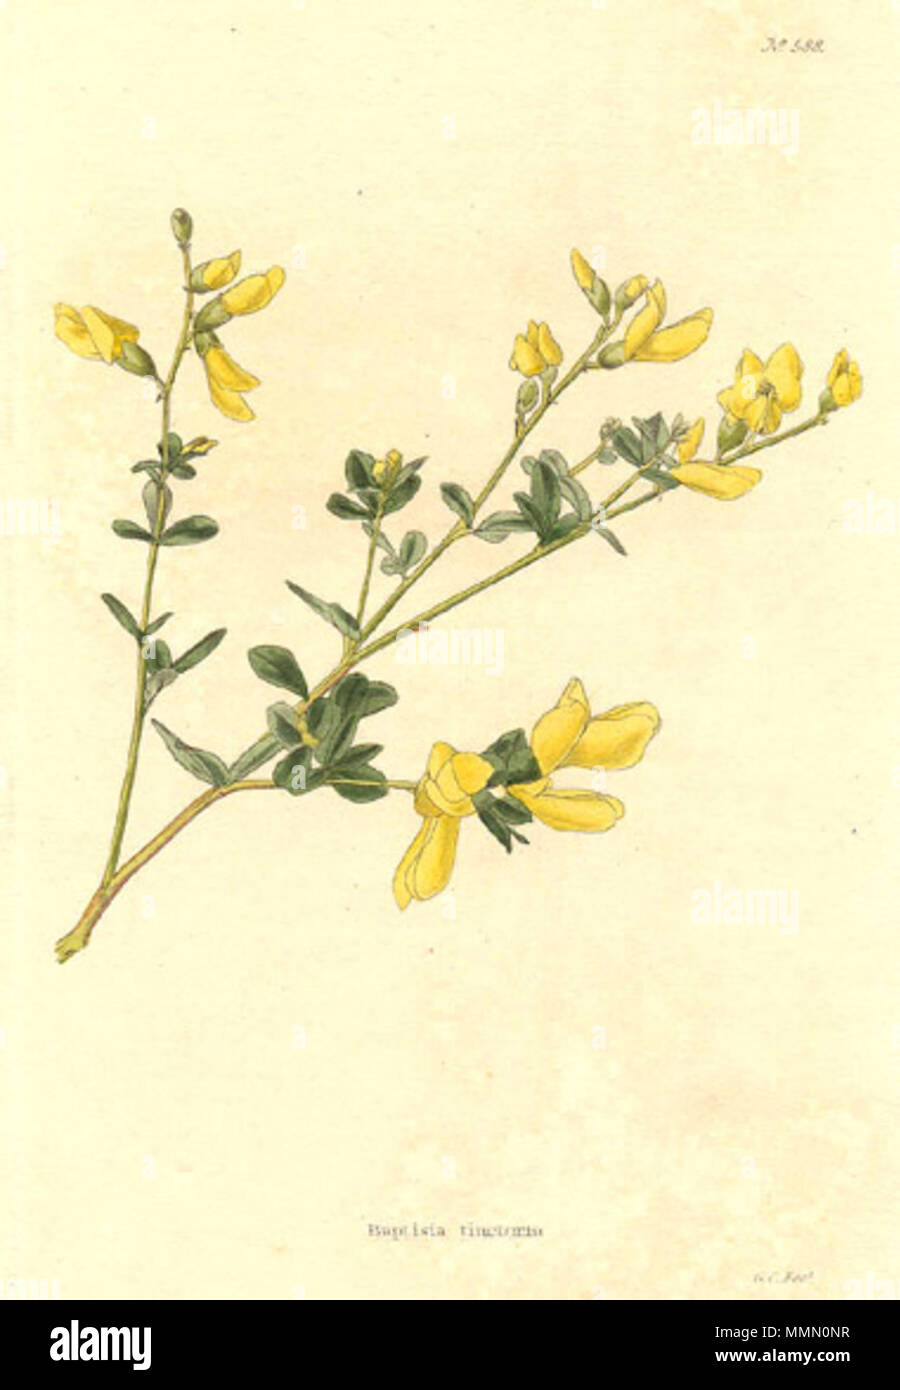 . Coloured engraving of Baptisia tinctoria wild indigo, a legume.  . 1822. engraving by George Cooke from drawings by George Loddiges, William Loddiges and others. 71 Baptisia-tinctoria-Conrad-Loddiges-1822 Stock Photo